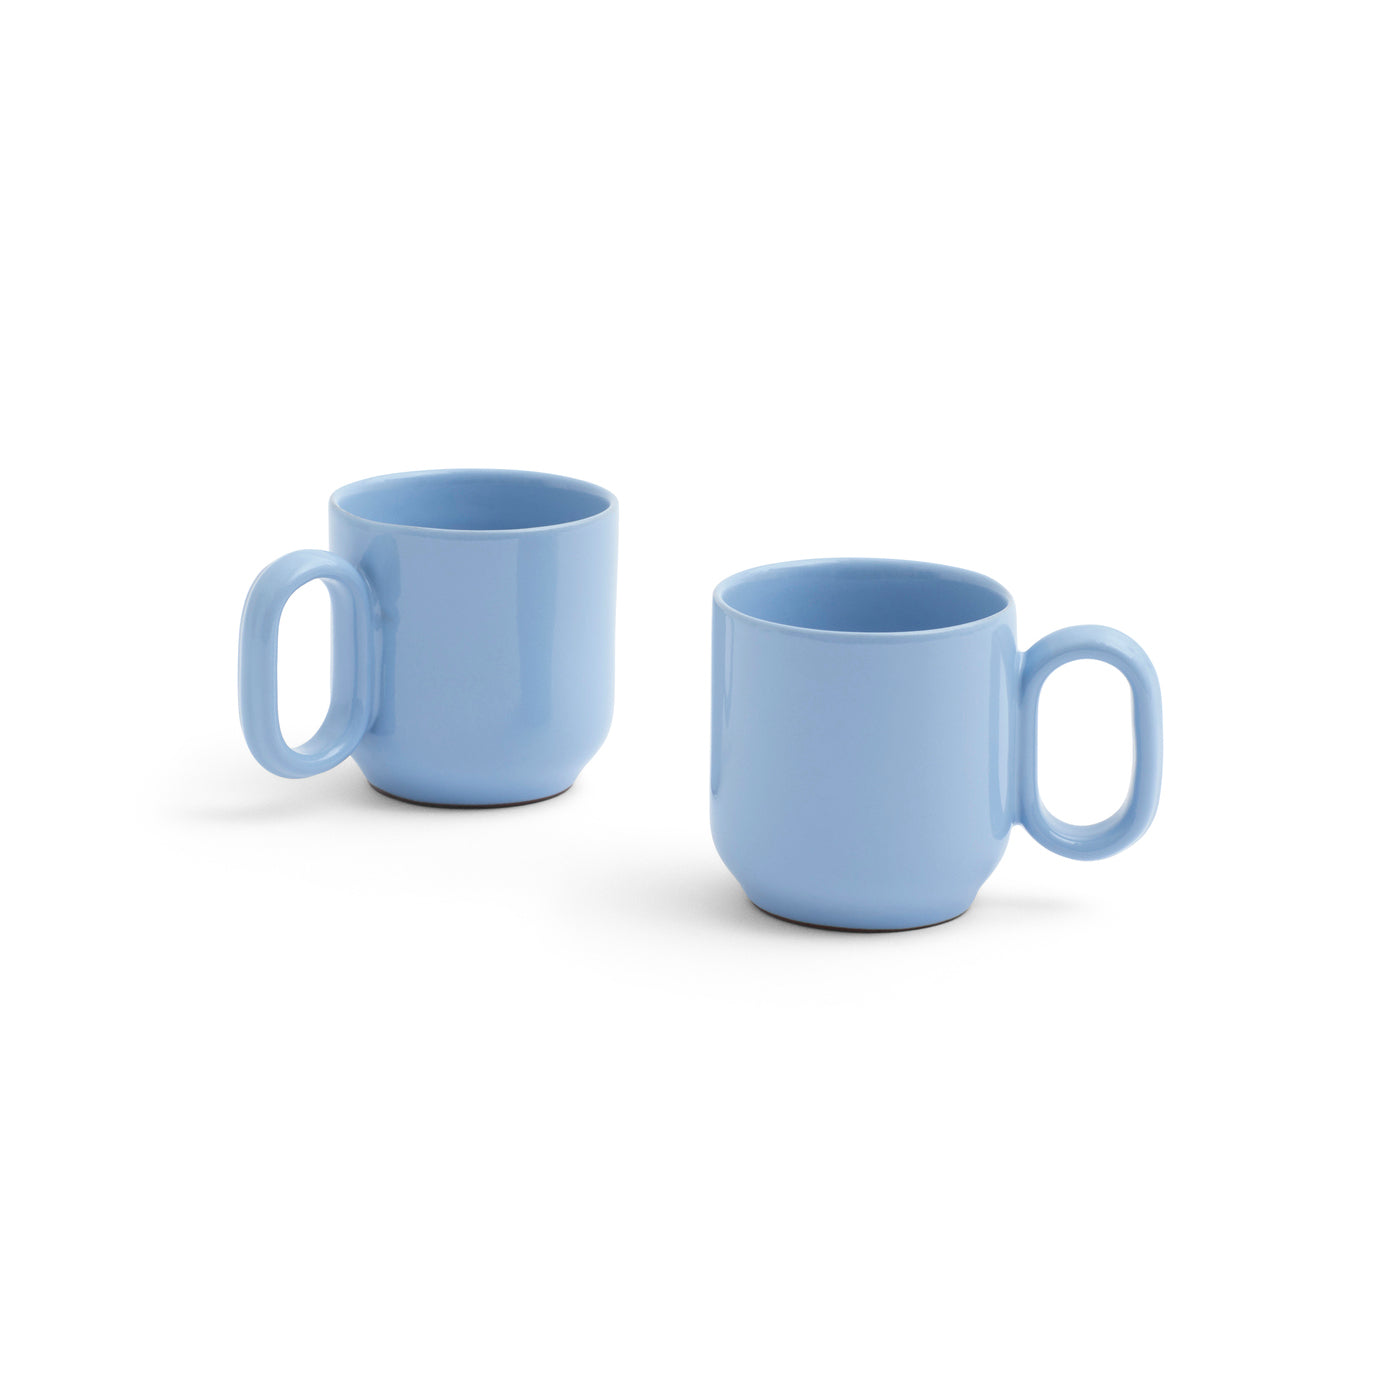 Clay cup set of 2